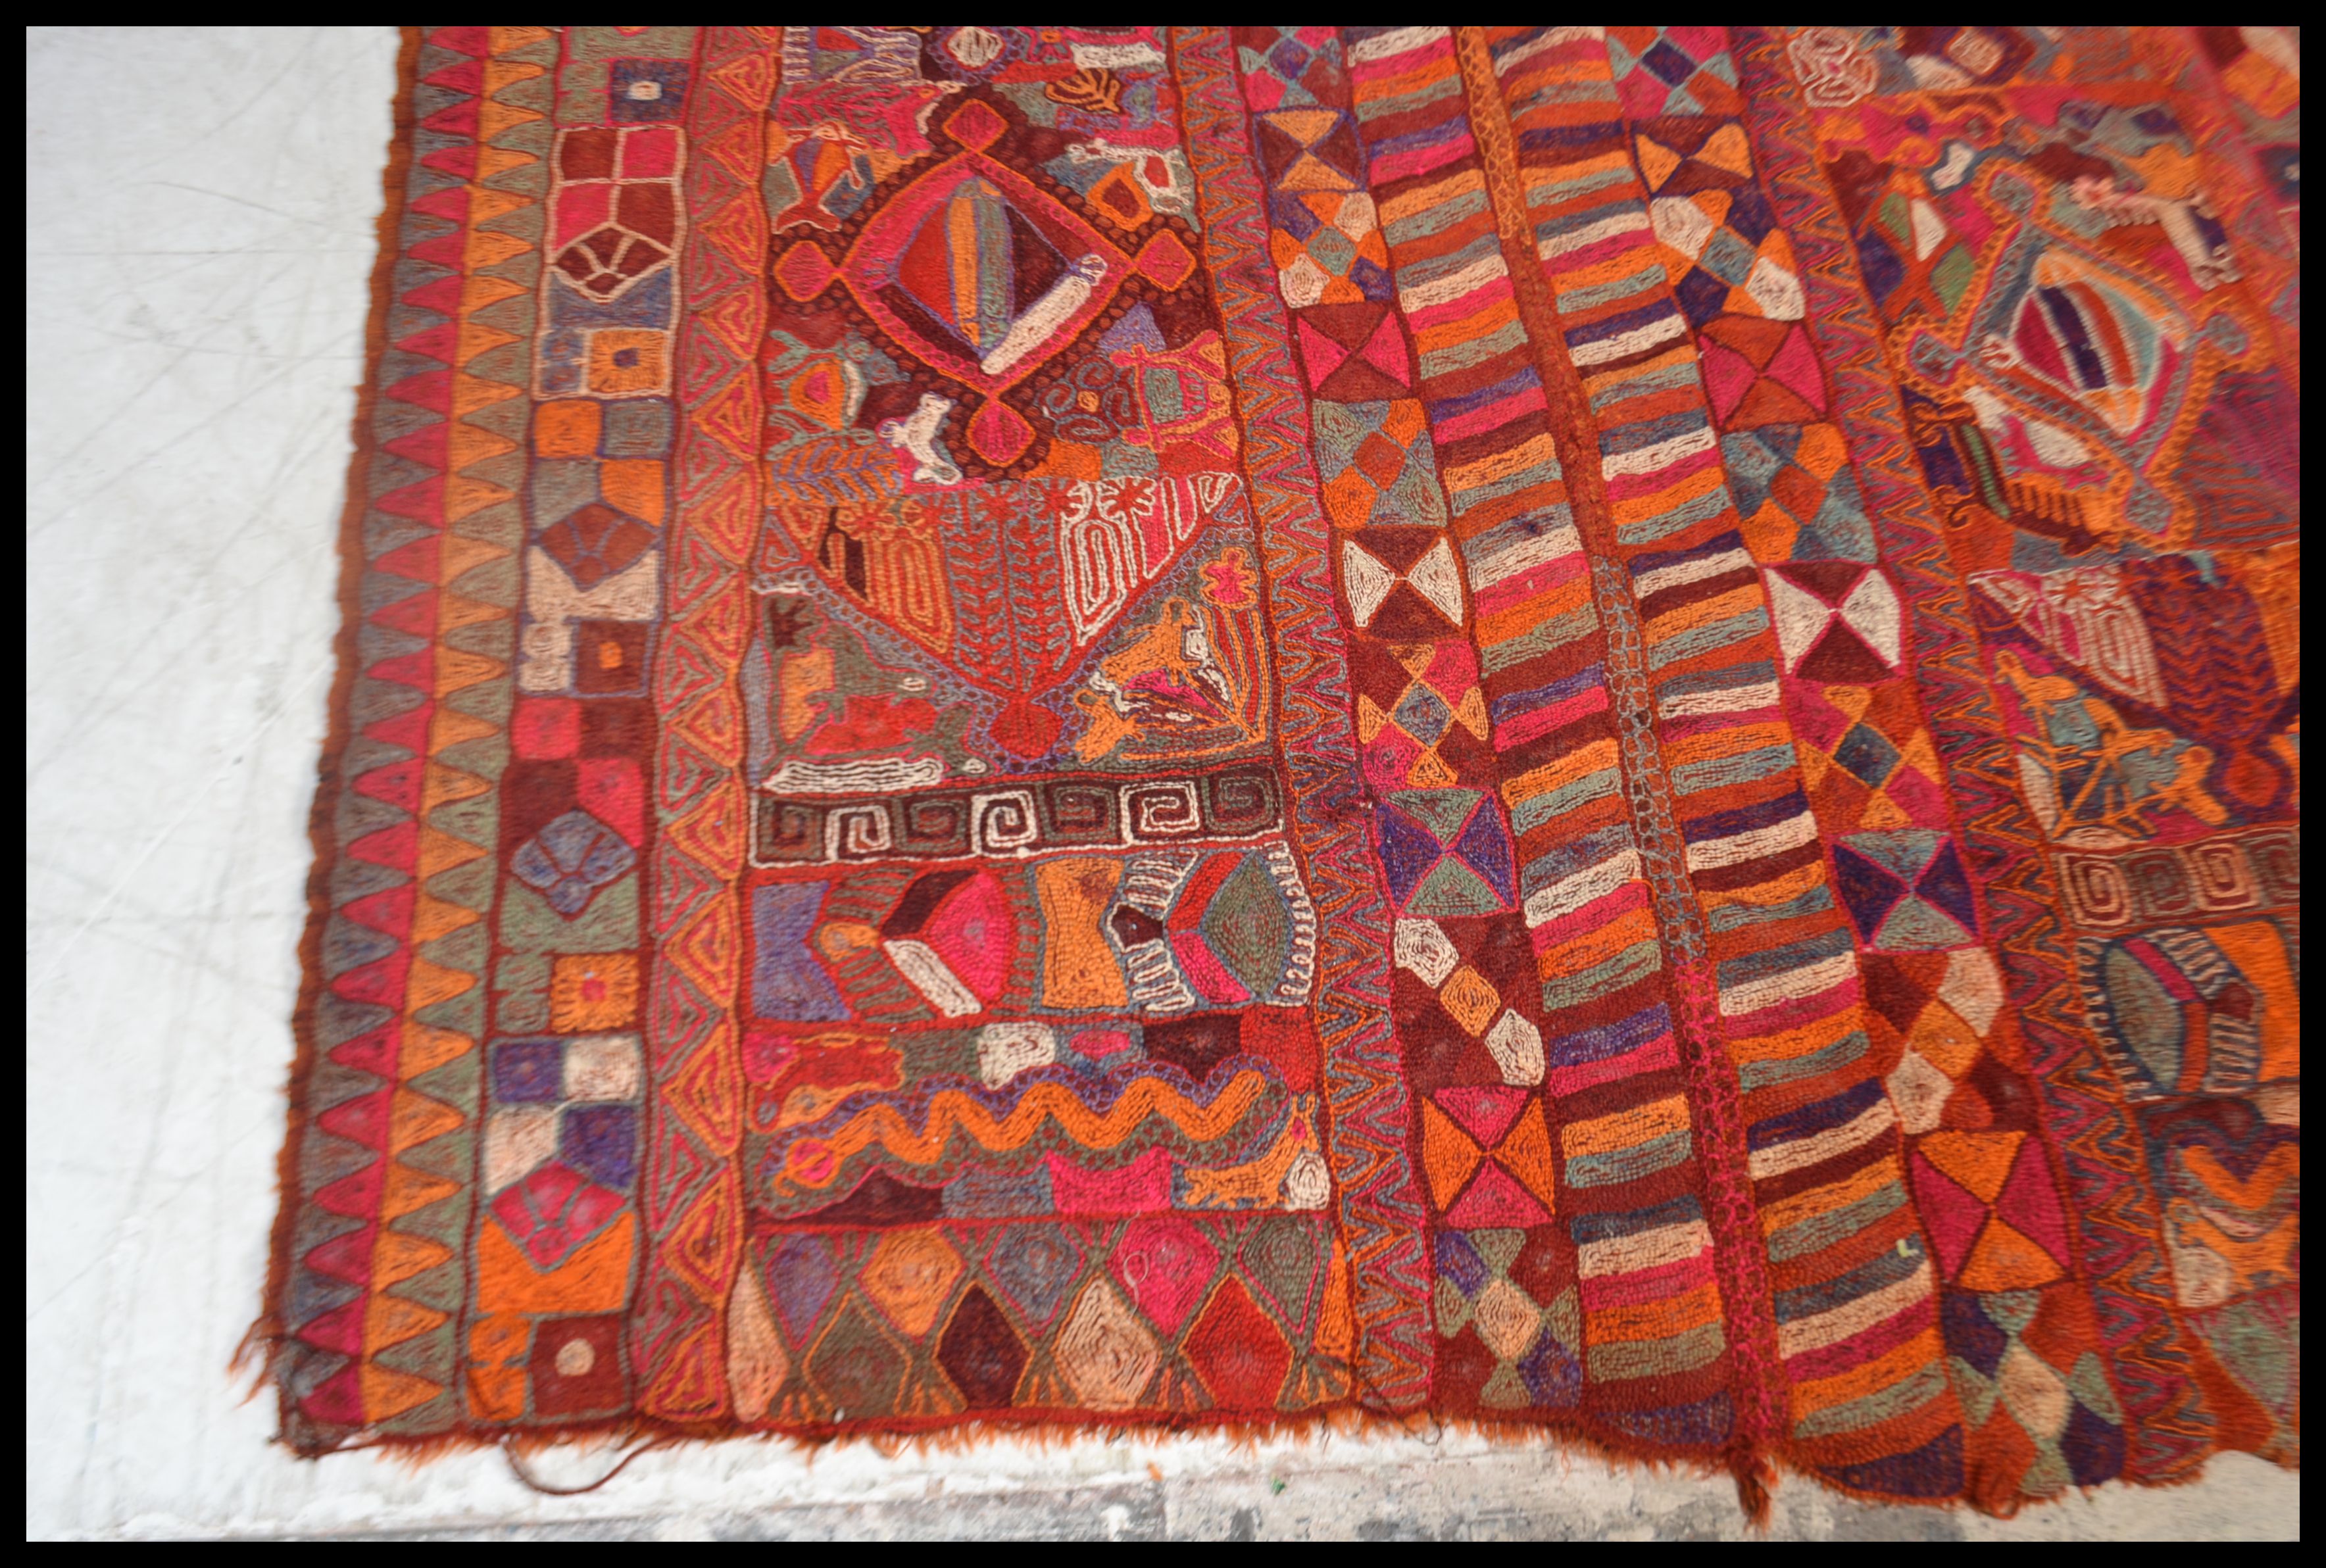 A  stunning large ethnic tribal carpet rug of handwoven bright vivid form, constructed from - Image 3 of 4